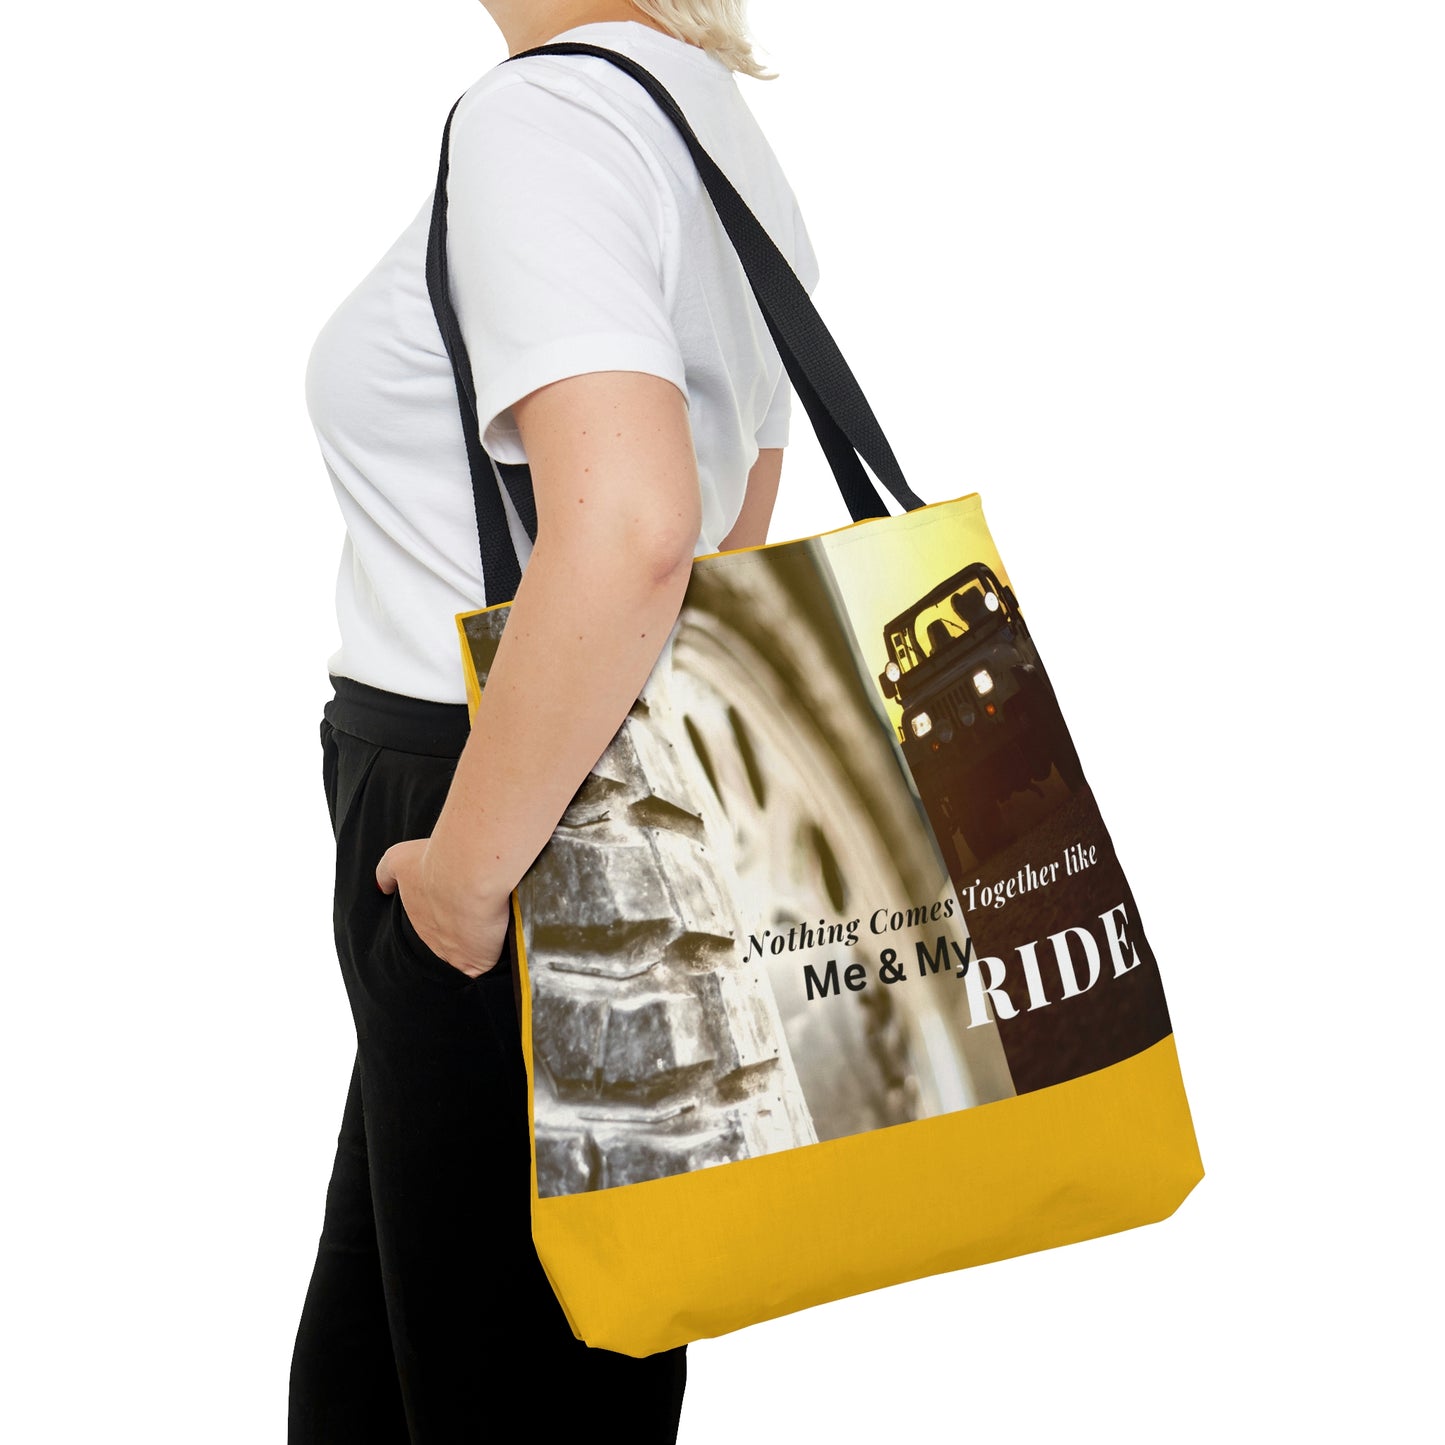 Me & My Ride AOP Tote Bag | BKLA | shoes & accessories | backpack, hat, phone cover, tote bags, clutch bags